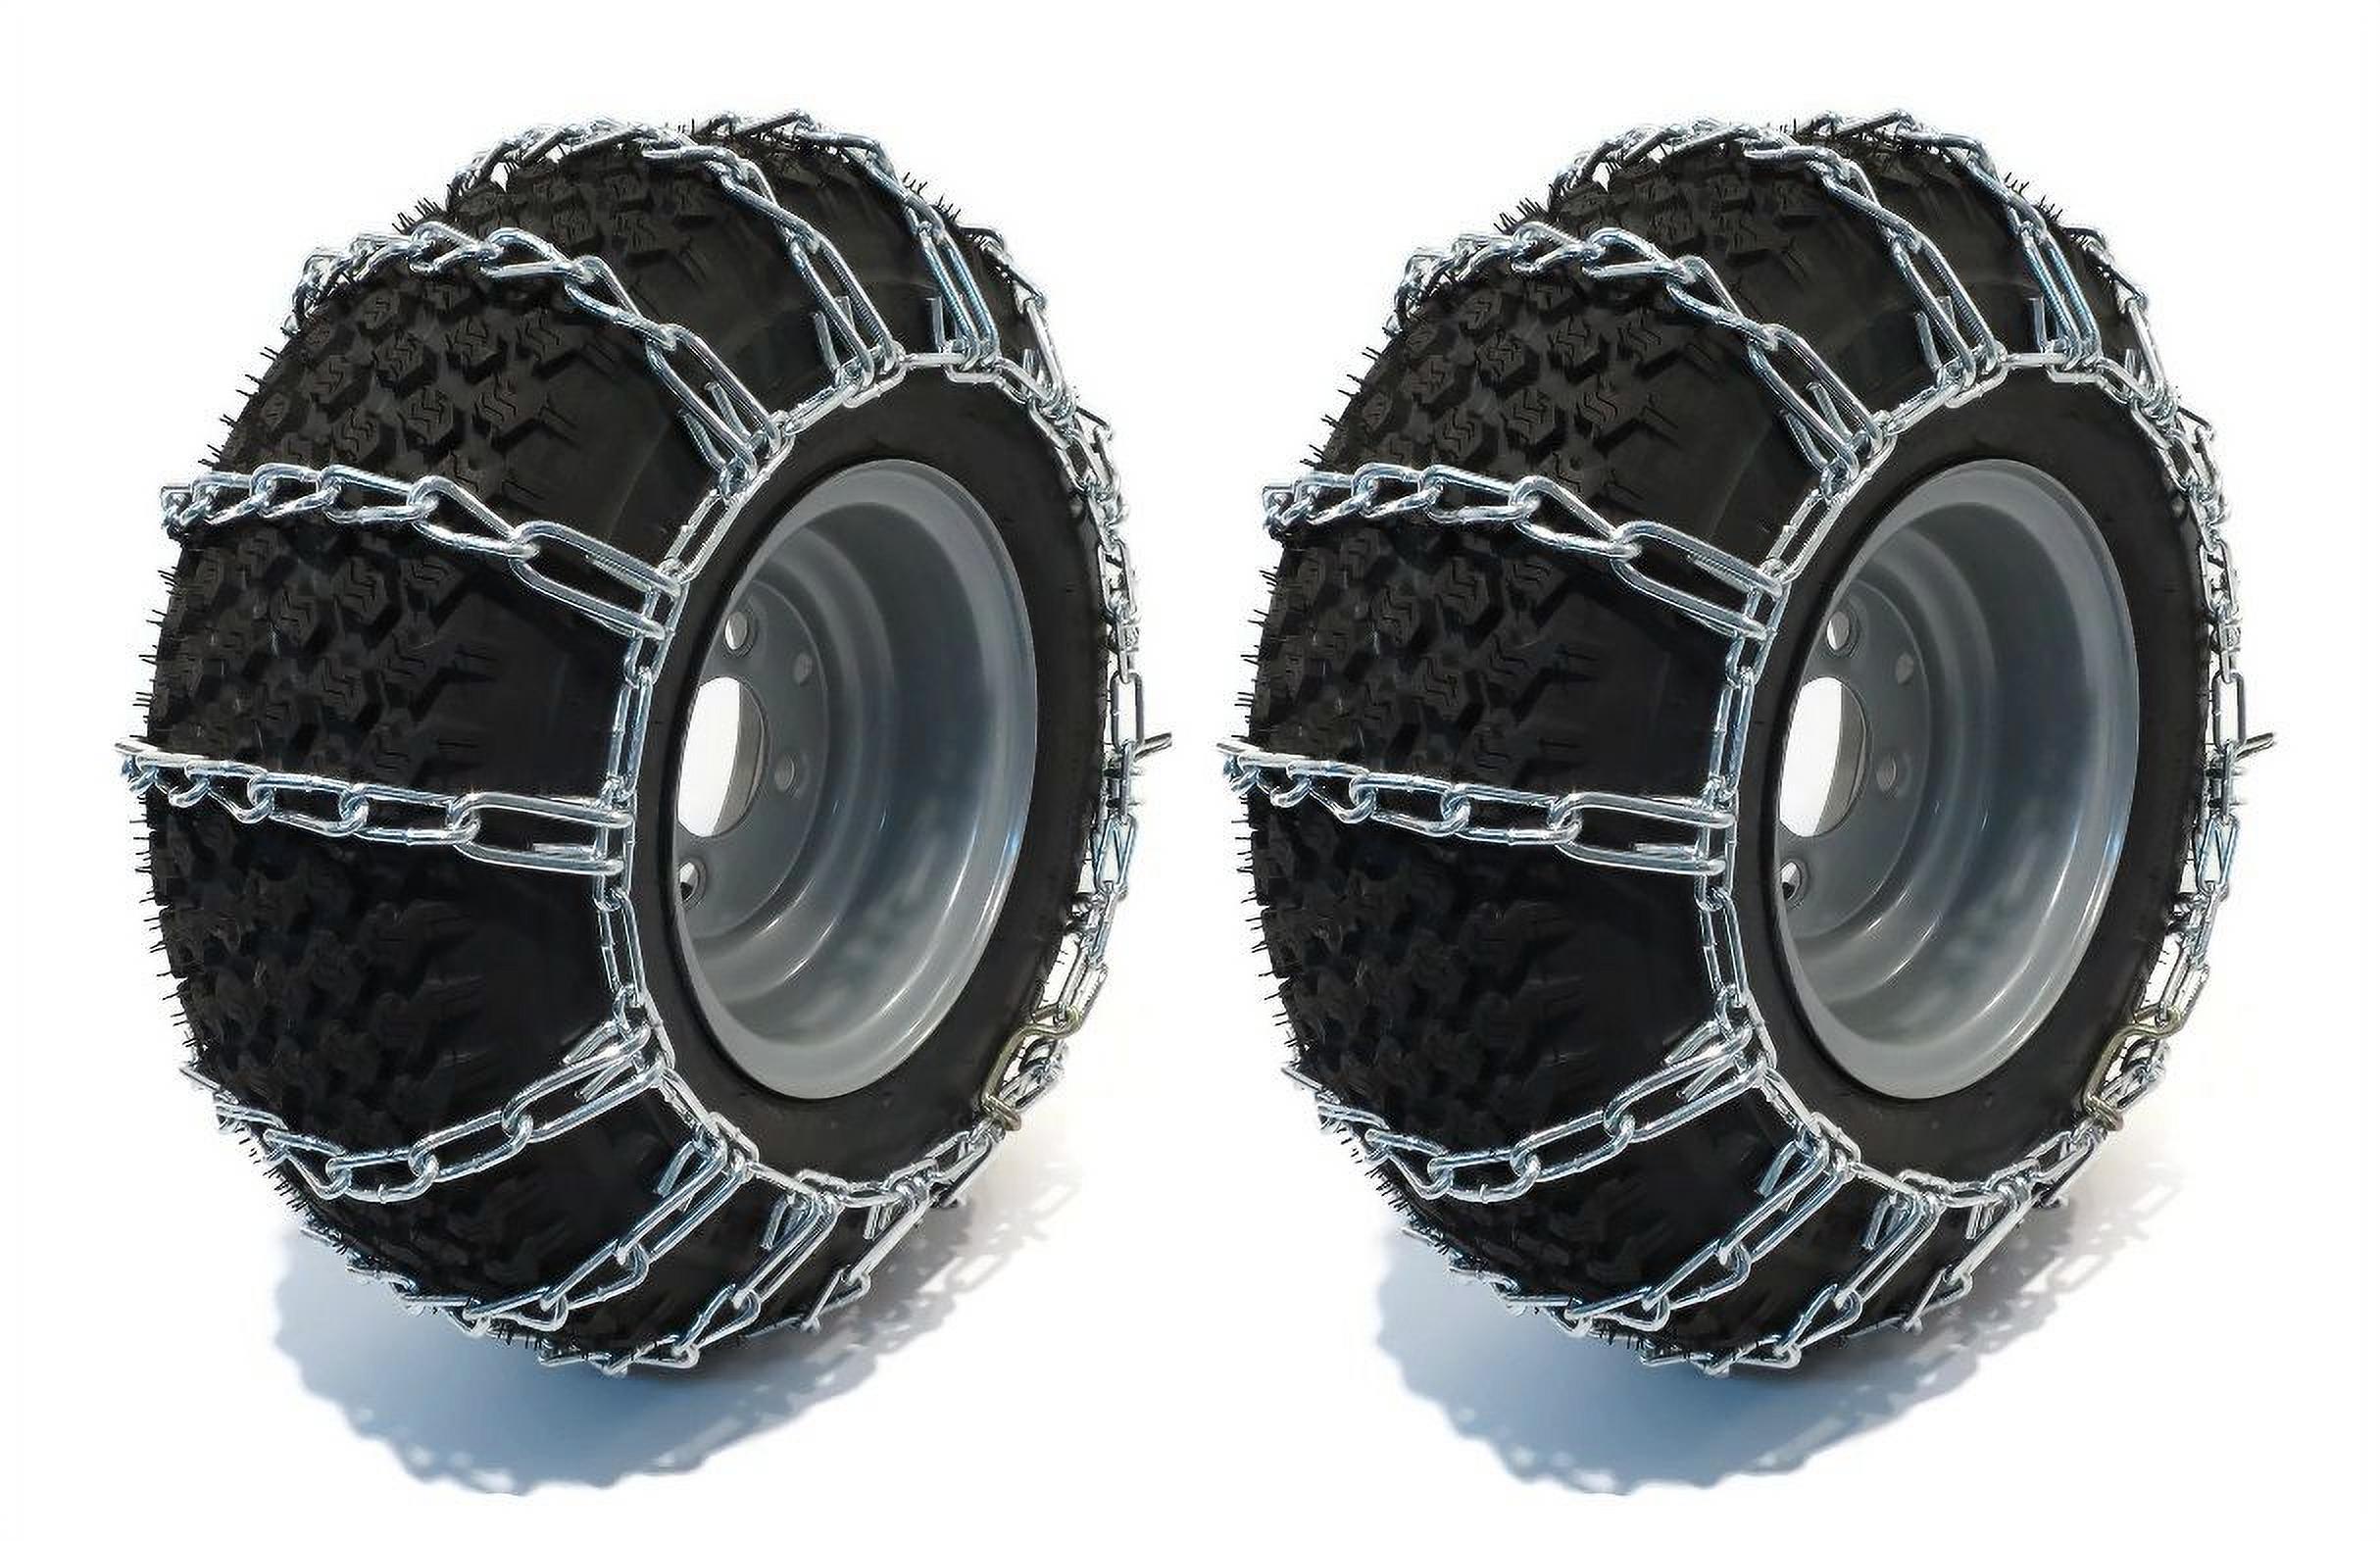 The ROP Shop | Pair 2 Link Tire Chains 18x8.5x8 For Simplicty Lawn Mower Garden Tractor Rider. TRS Part Number: 100149 - image 1 of 5